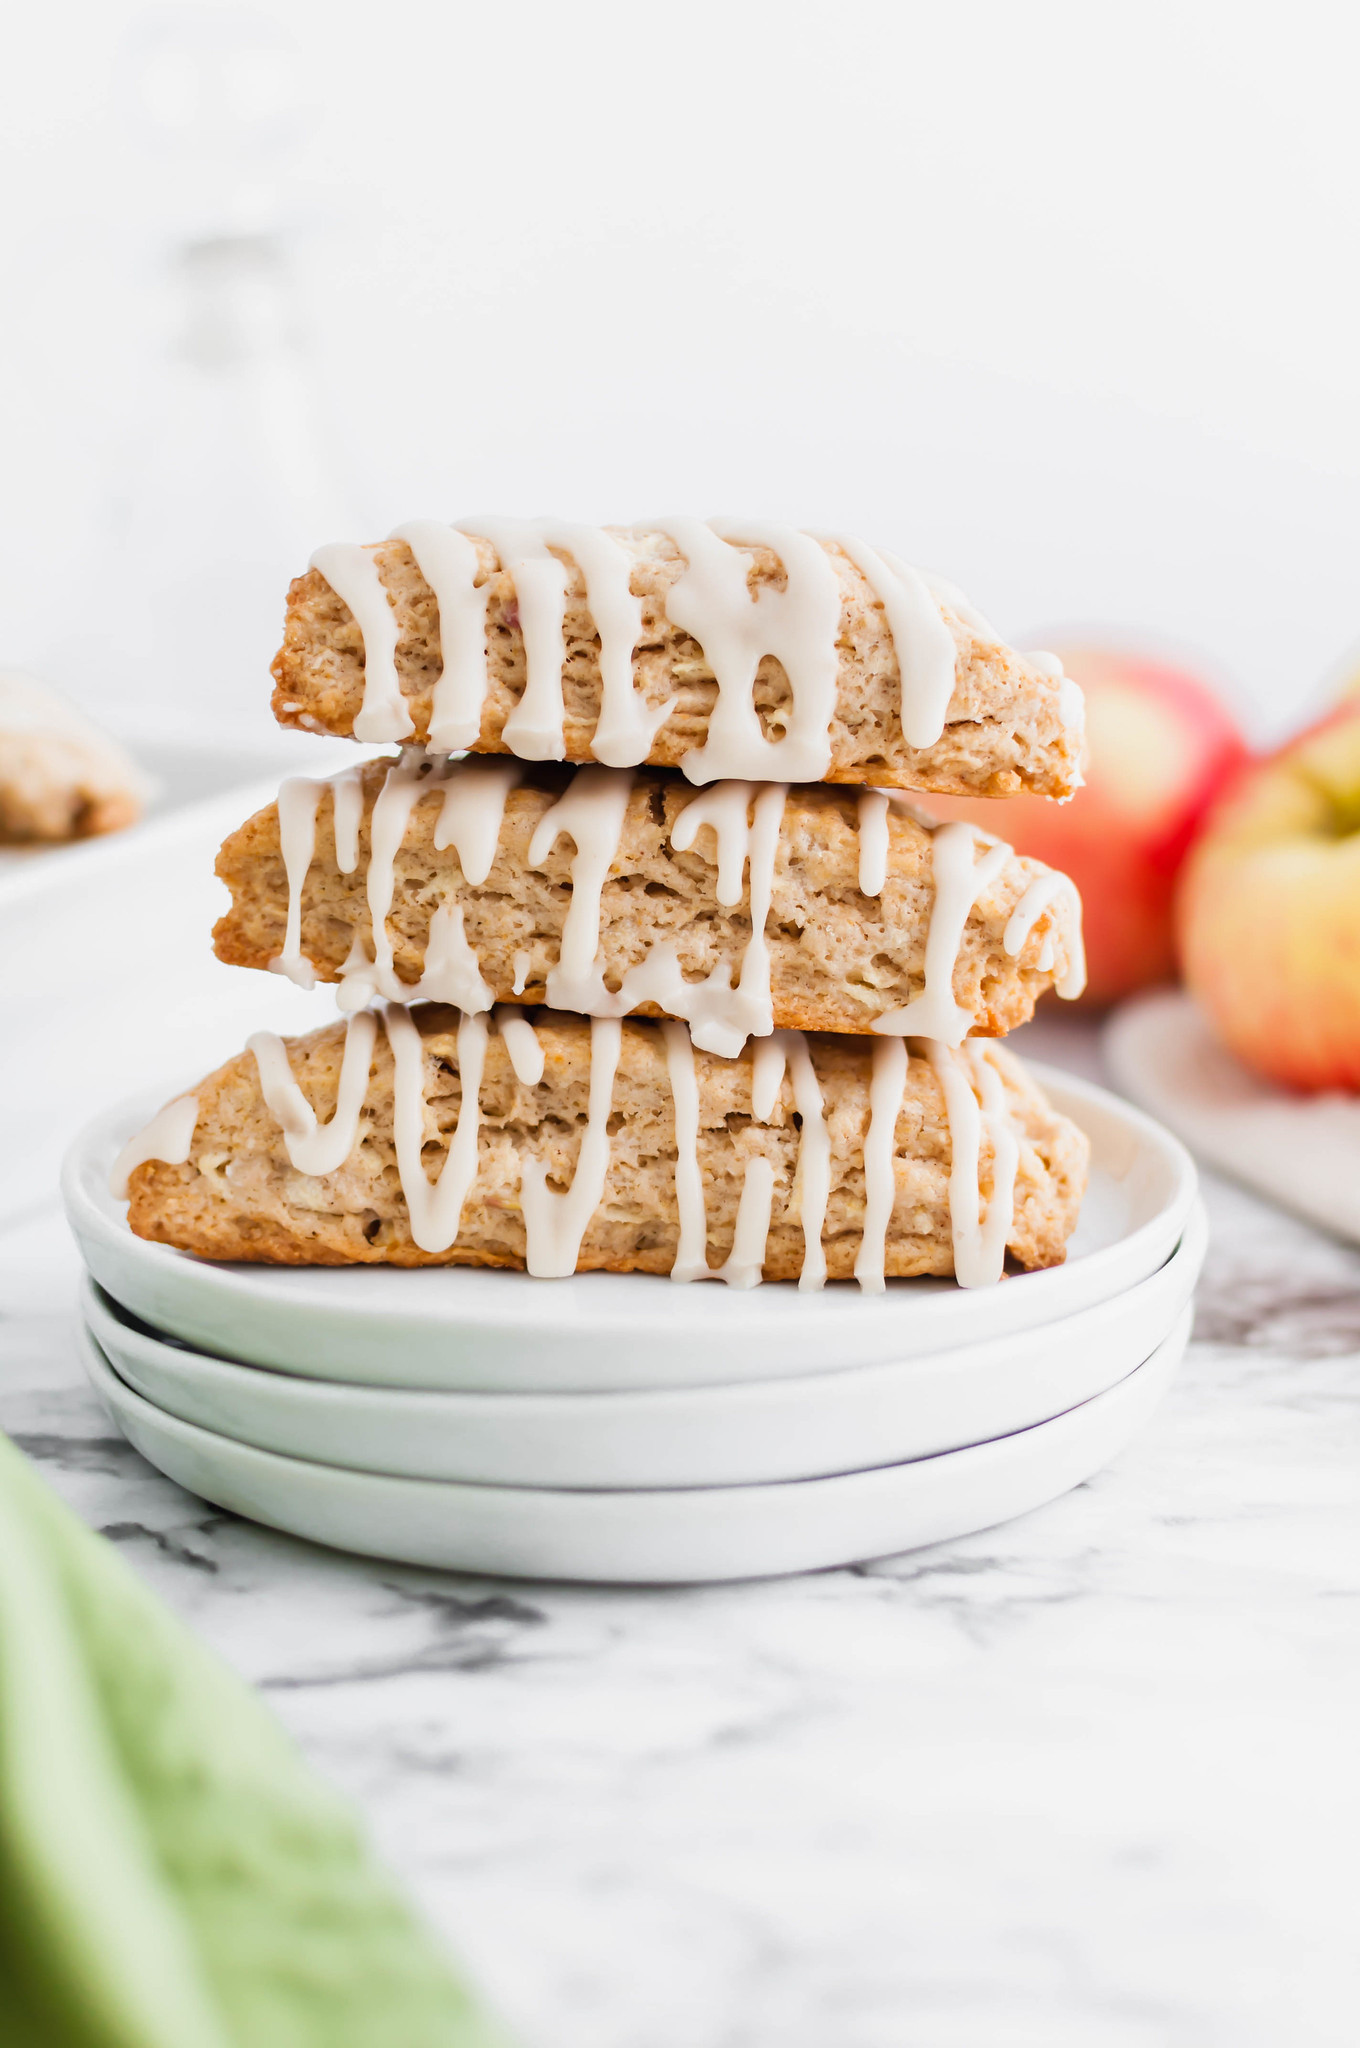 These Apple Cinnamon Scones with Maple Glaze are the perfect fall treat. Easy to make and perfectly tender.